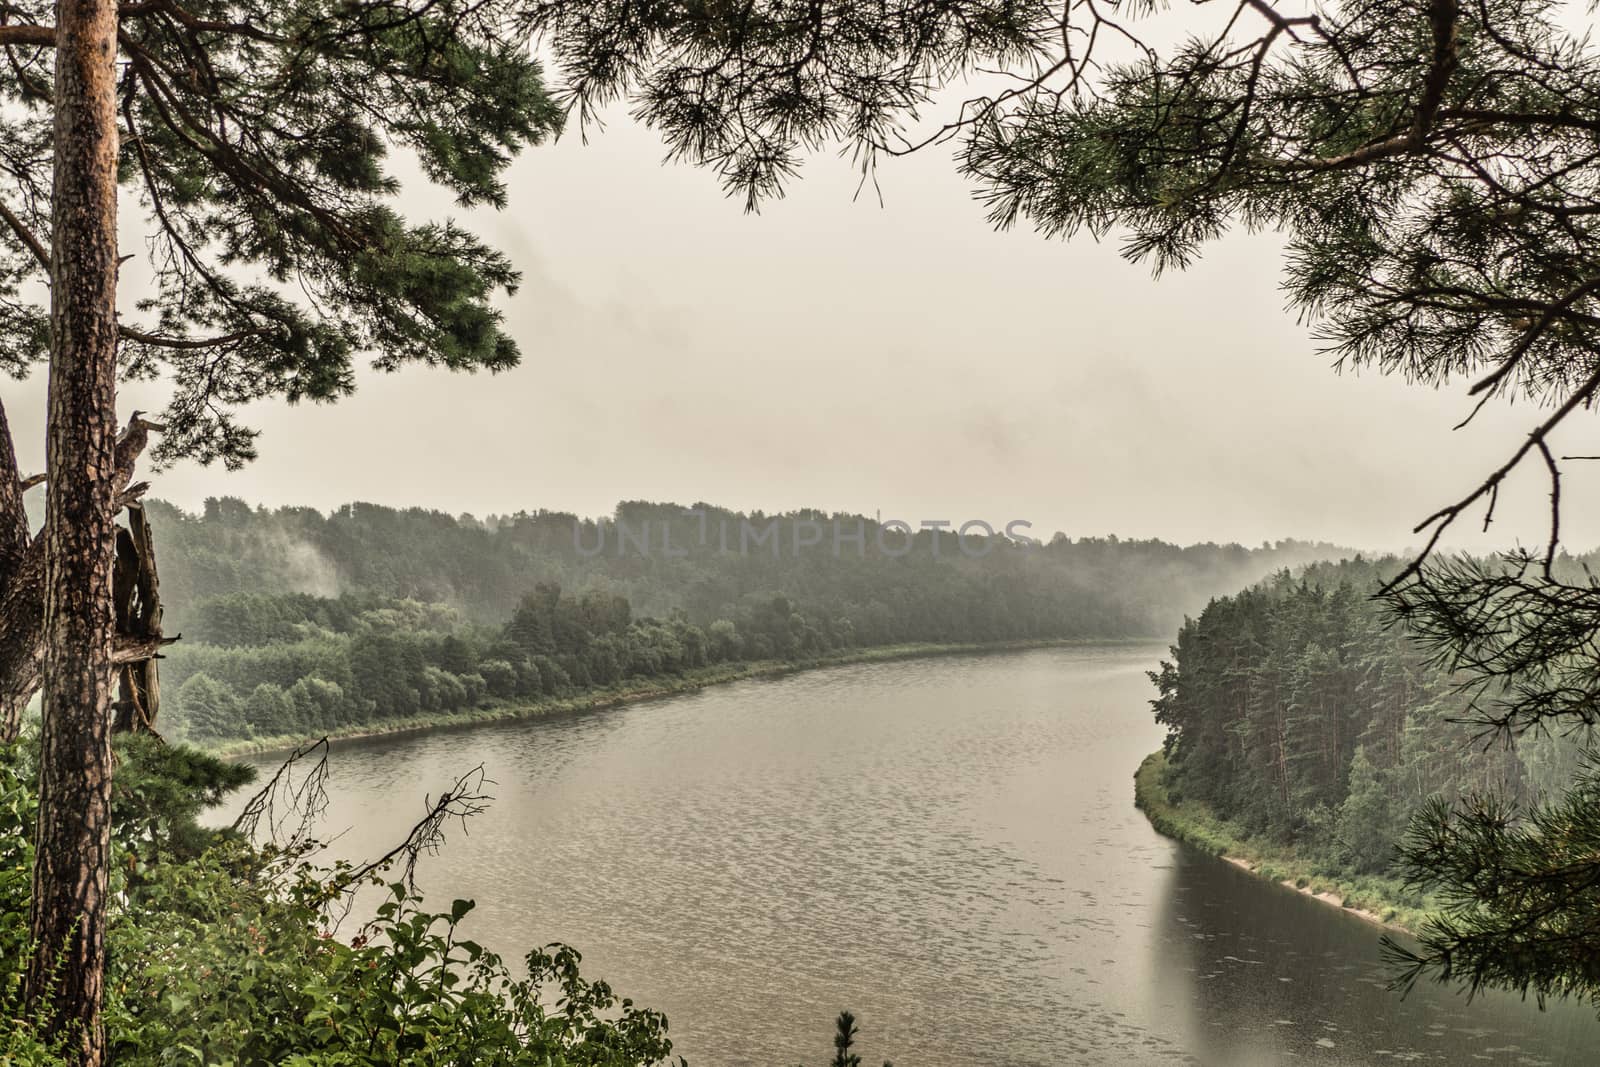 Dramatic Mystic Landscape on a Foggy River. Amazing River and Forest Landscape.